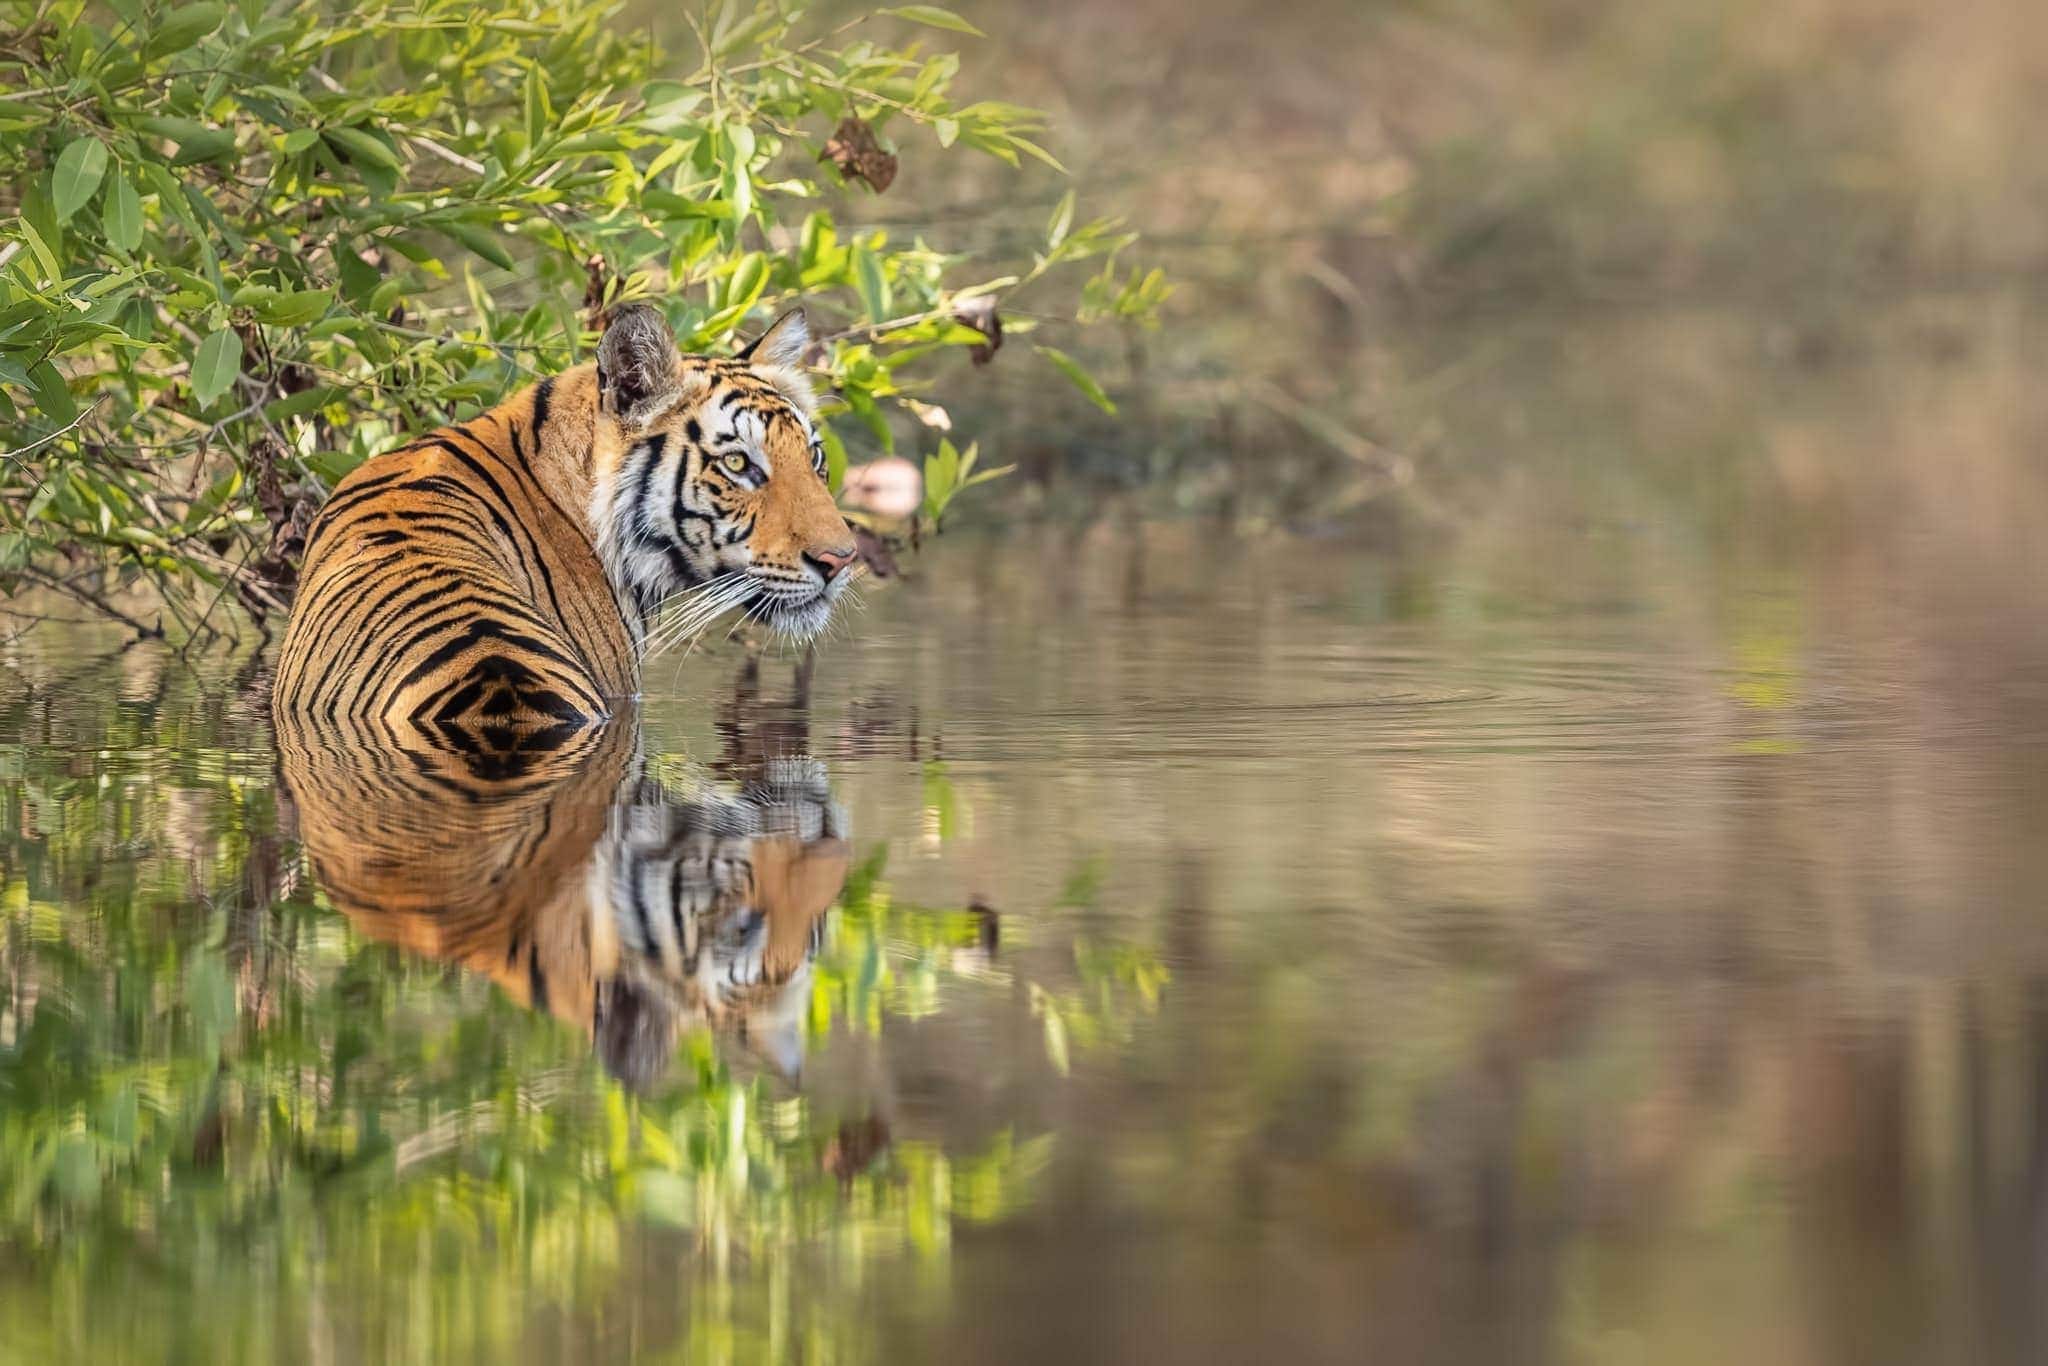 One Of Bandhavgarhs Beautiful Bengal Tigers In The Cooling Water Of A Pool Photographed During The Natureslens Tigers Of Bandhavgarh Photography Holiday